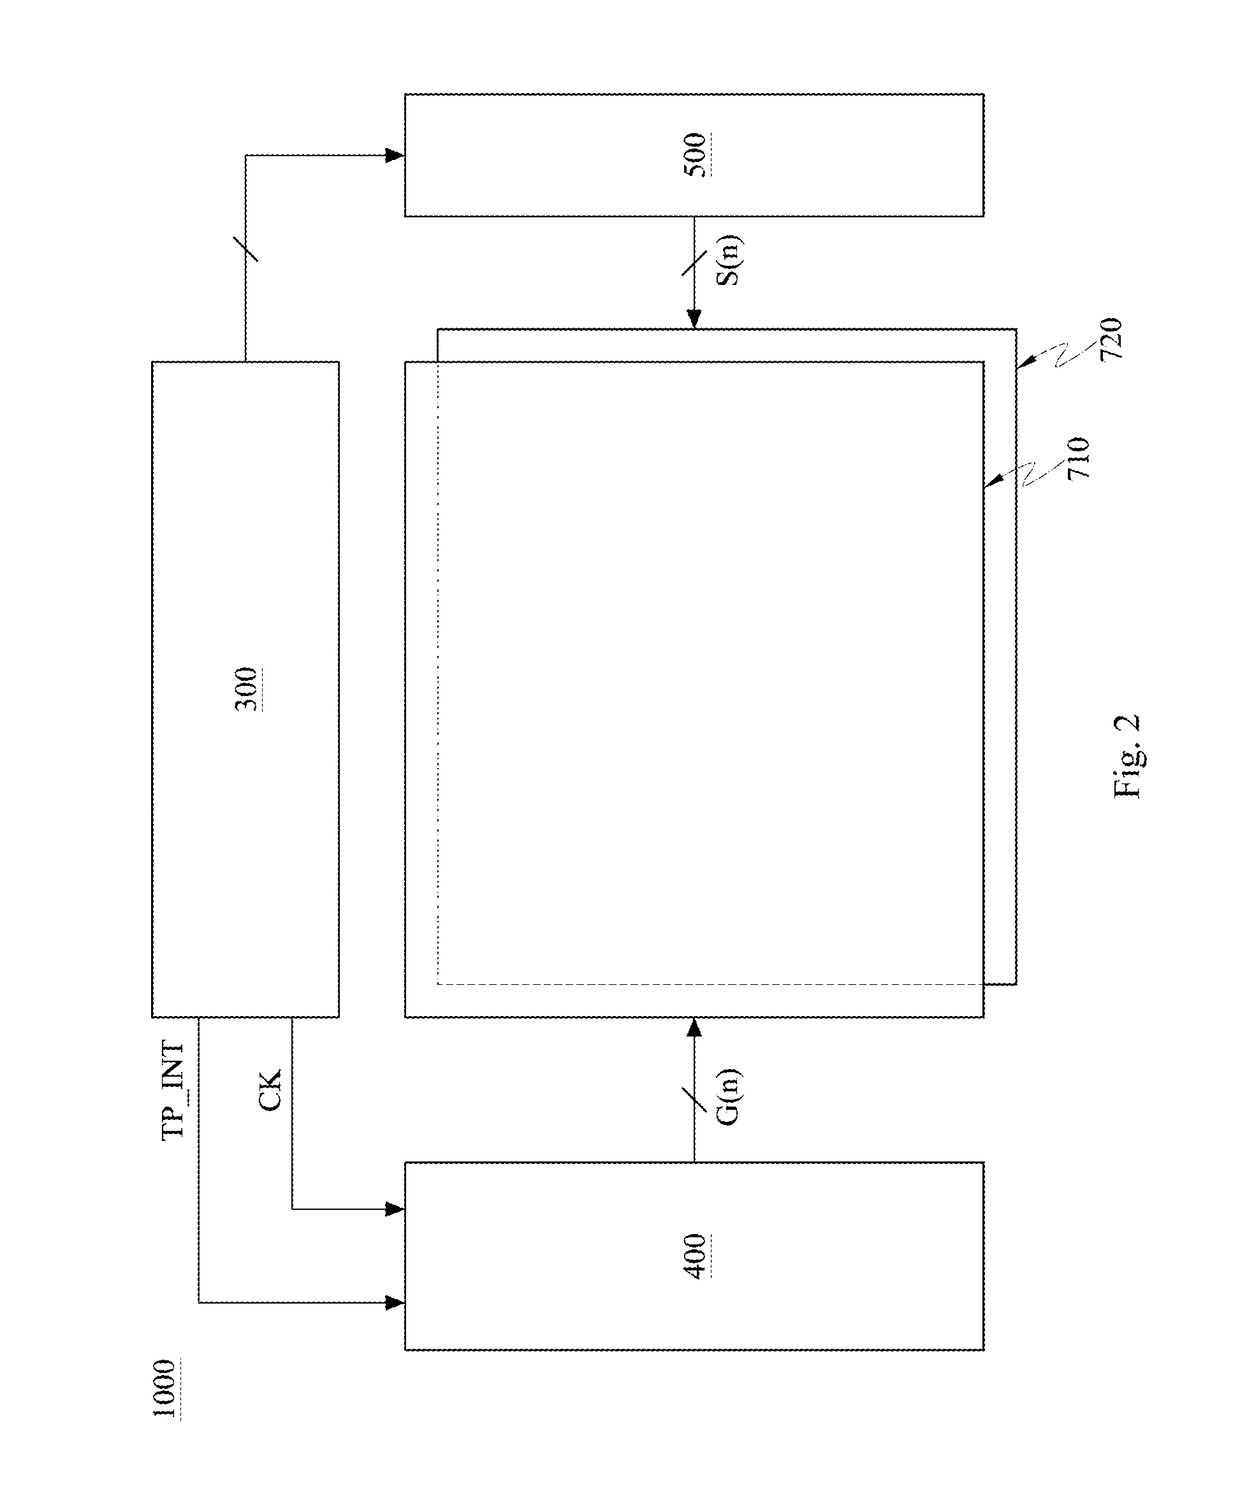 Touch display apparatus and shift register thereof